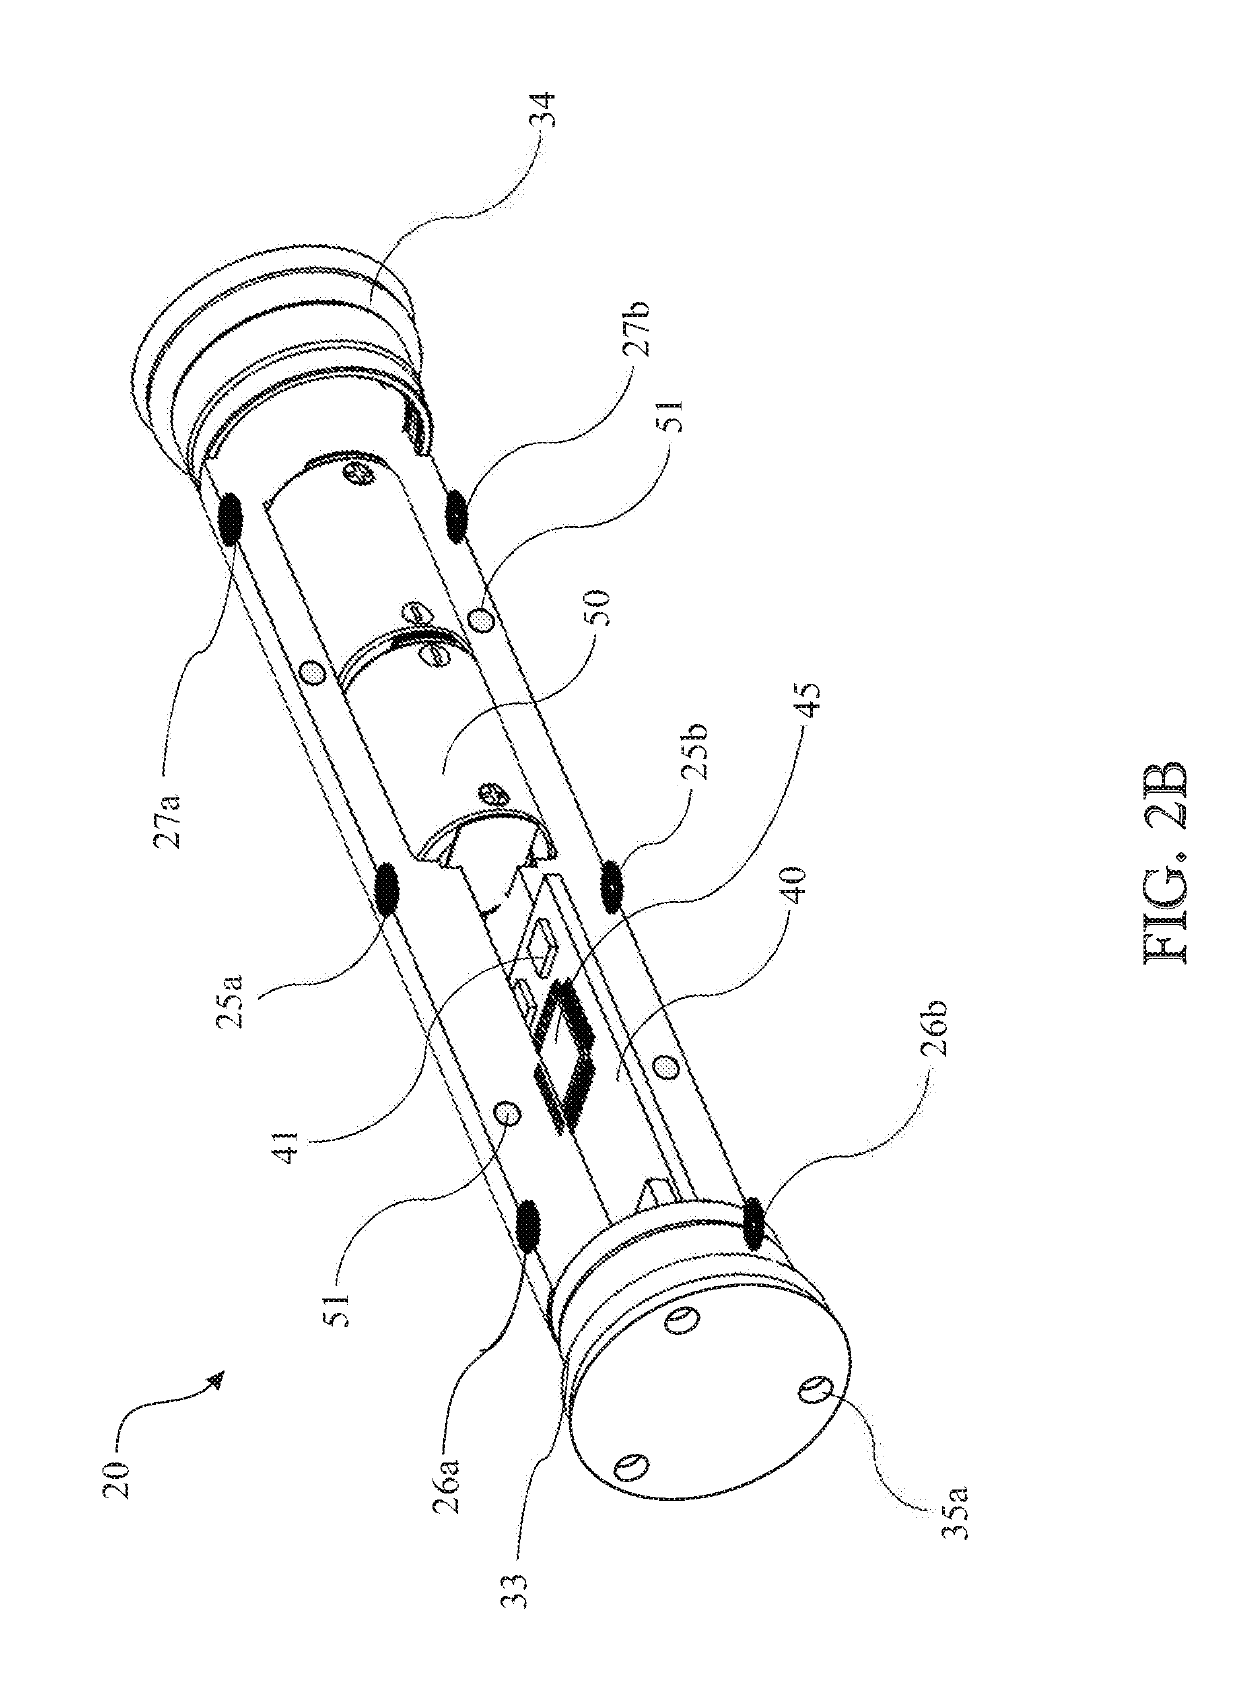 Roller with integrated load detection